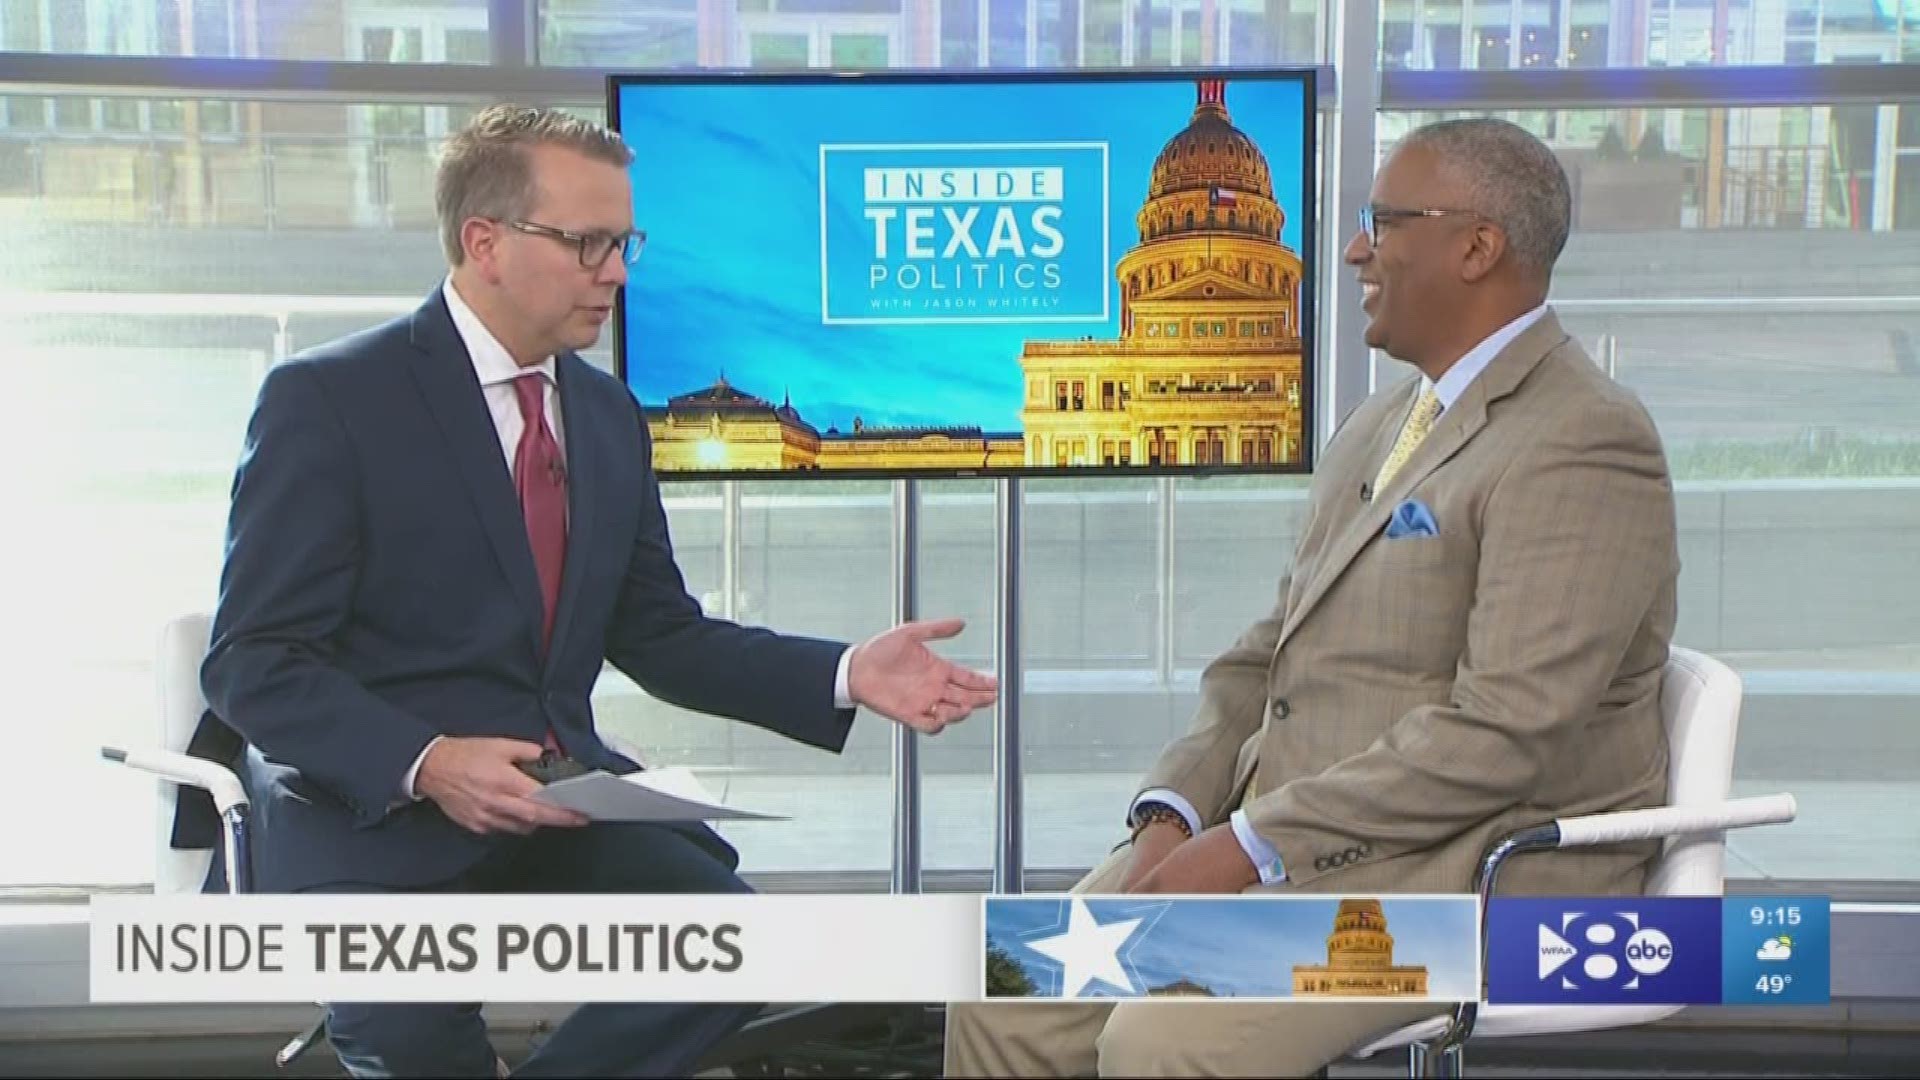 Dallas attorney Victor Vital joined host Jason Whitely to discuss both the legal and political issues with the case. Vital is a partner with Barnes & Thornburg LLP.